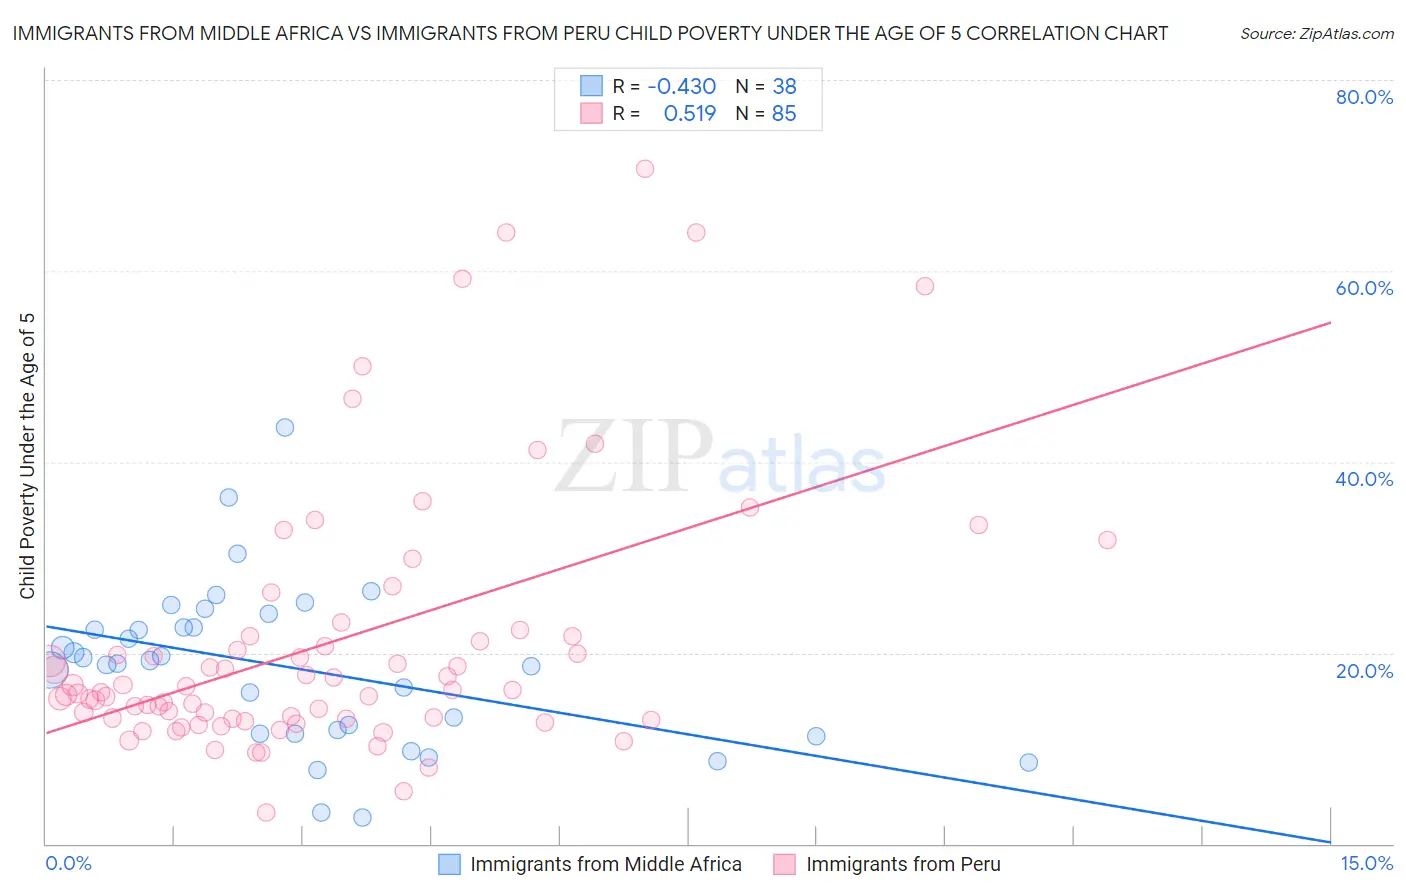 Immigrants from Middle Africa vs Immigrants from Peru Child Poverty Under the Age of 5